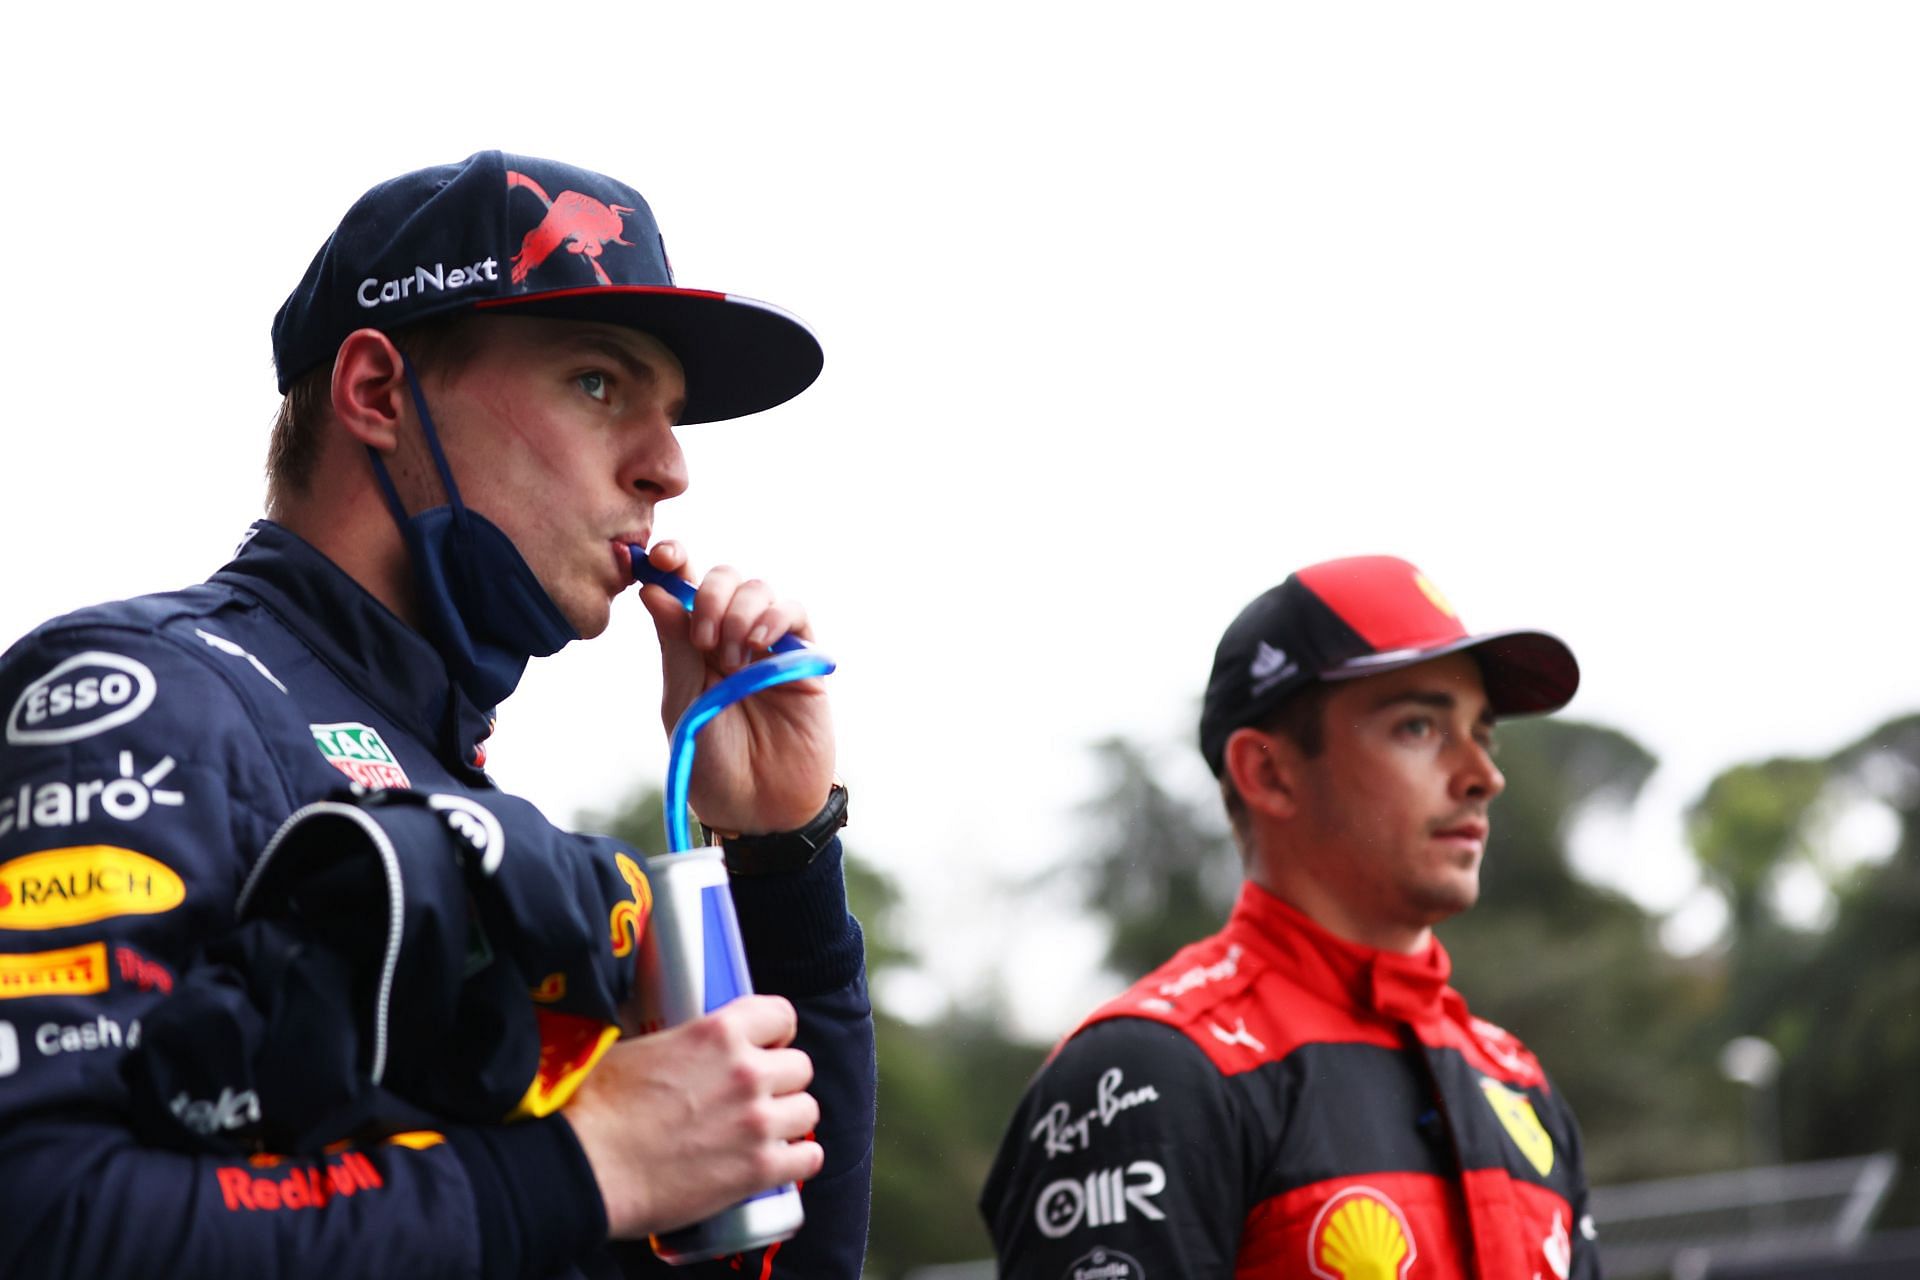 Max Verstappen and Charles Leclerc in parc ferm&eacute; during qualifying ahead of the F1 Grand Prix of Emilia Romagna (Photo by Dan Mullan/Getty Images)